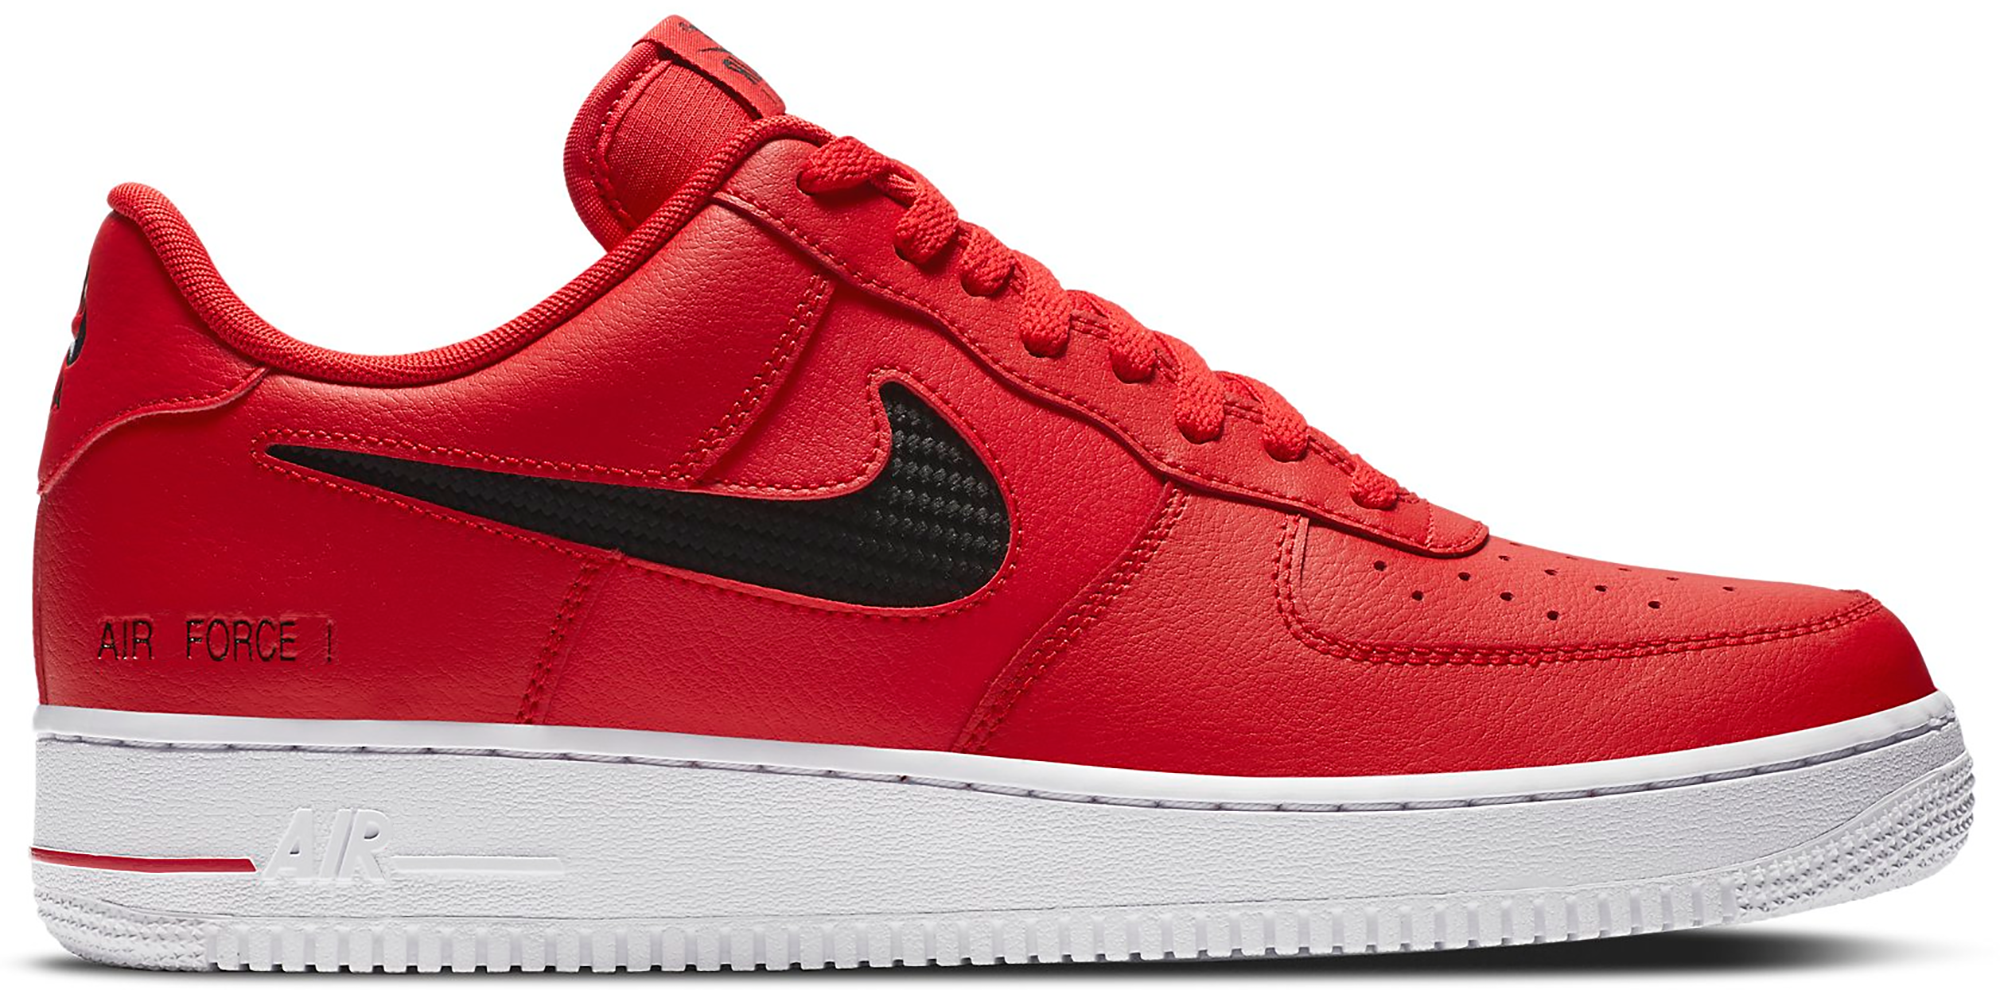 Nike Air Force 1 Low Cut Out Swoosh Red 